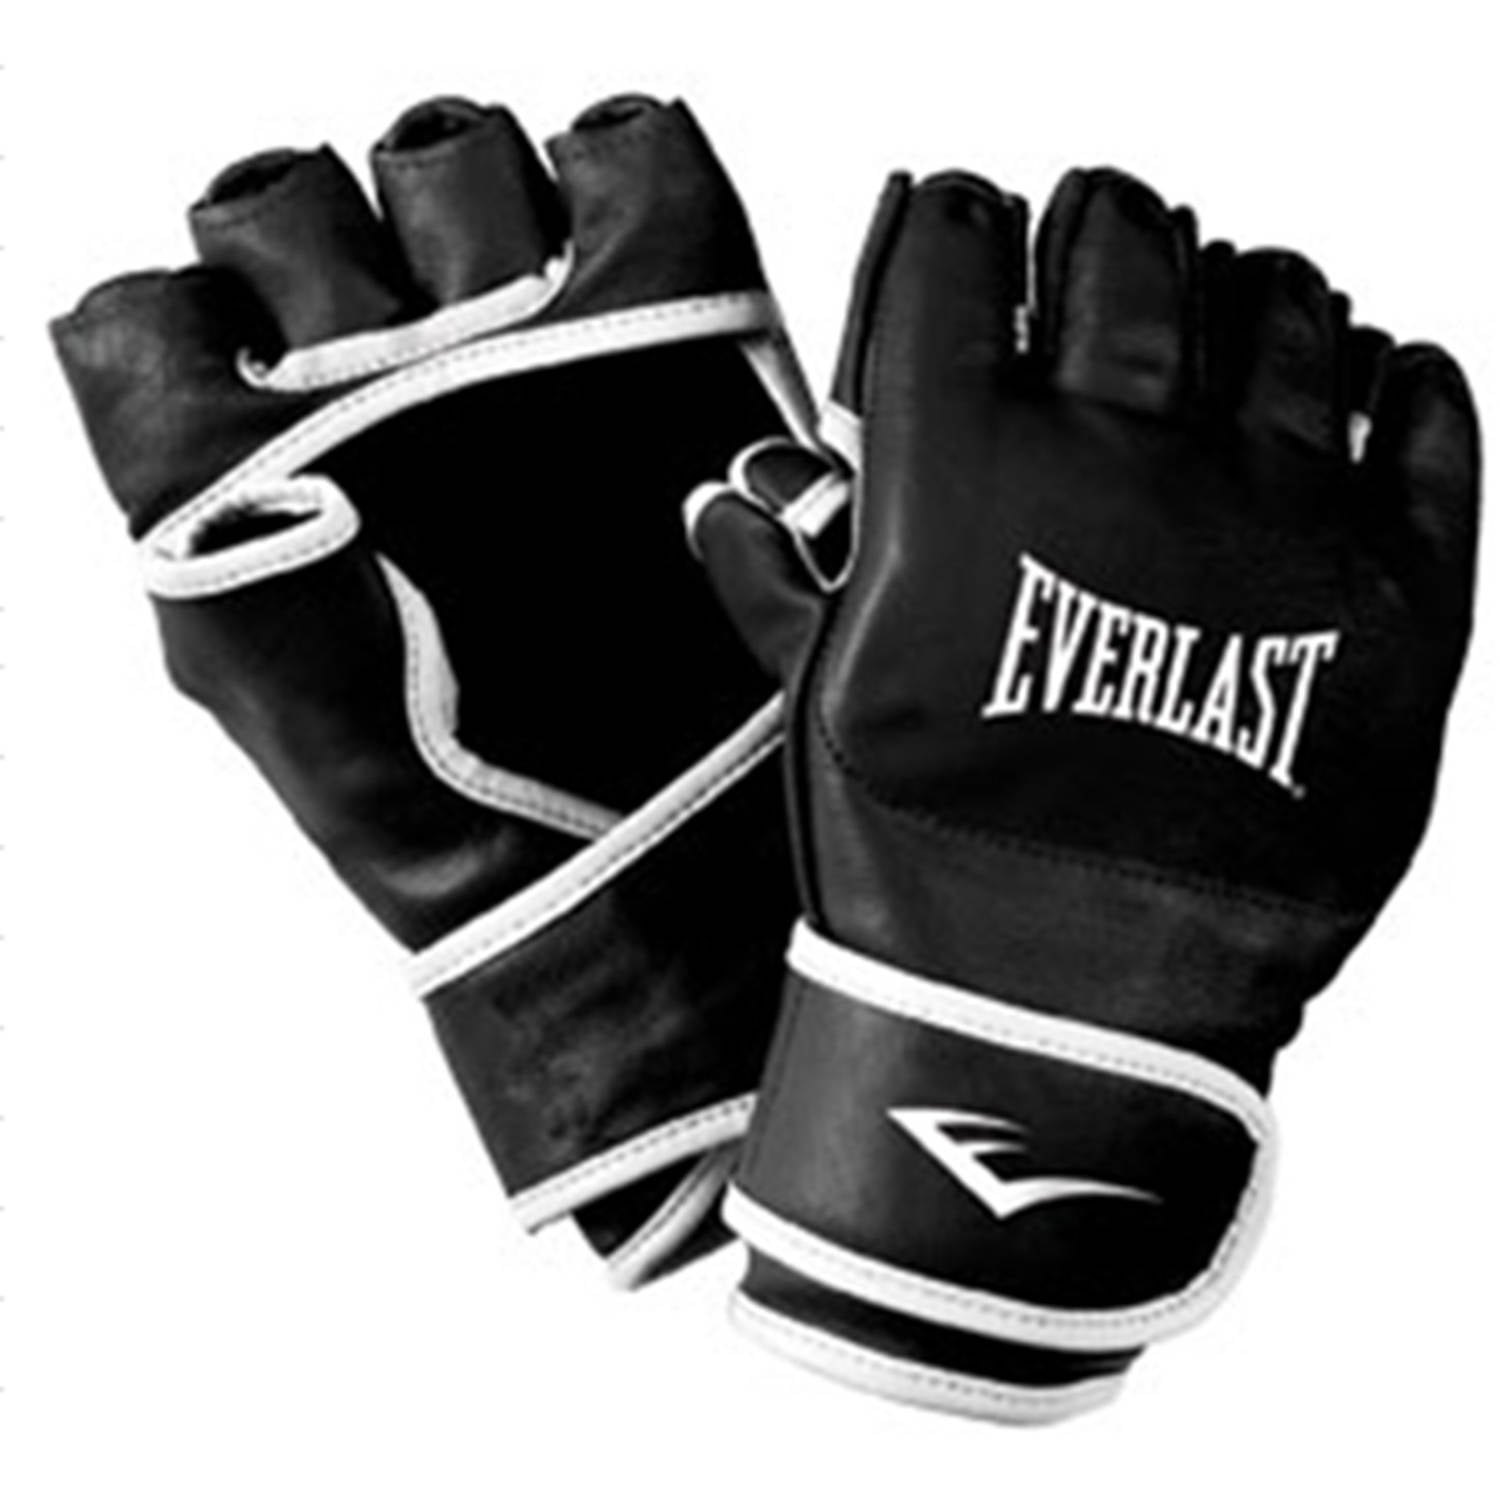 New Everlast 7778 Pro Style Women's MMA Training Grappling Gloves Pink Large/XL 